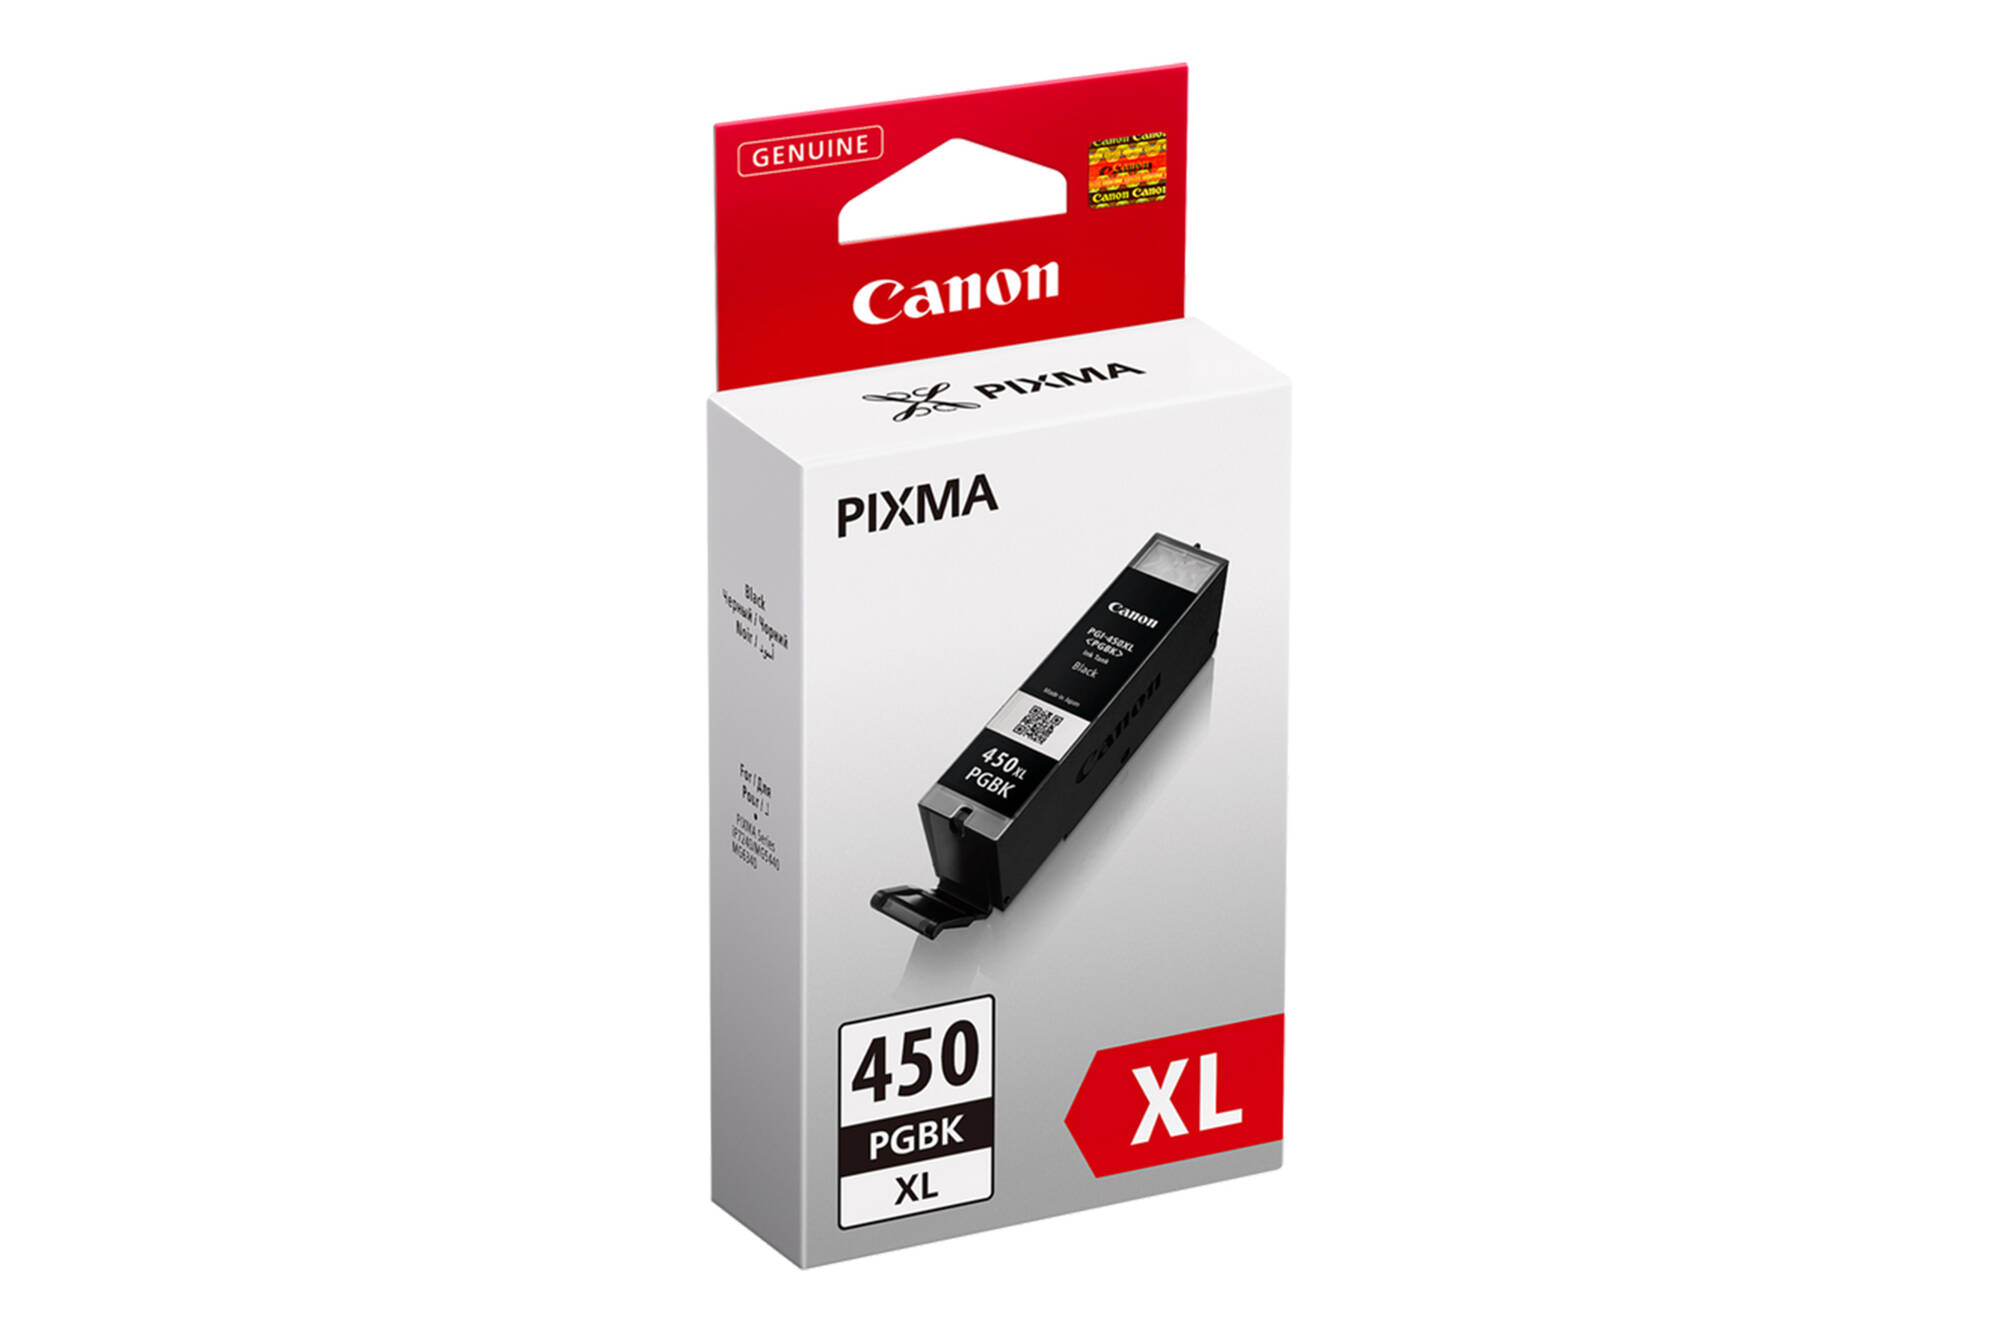 Canon PG-560 CL-561 Multipack Ink TS5352 TS7451